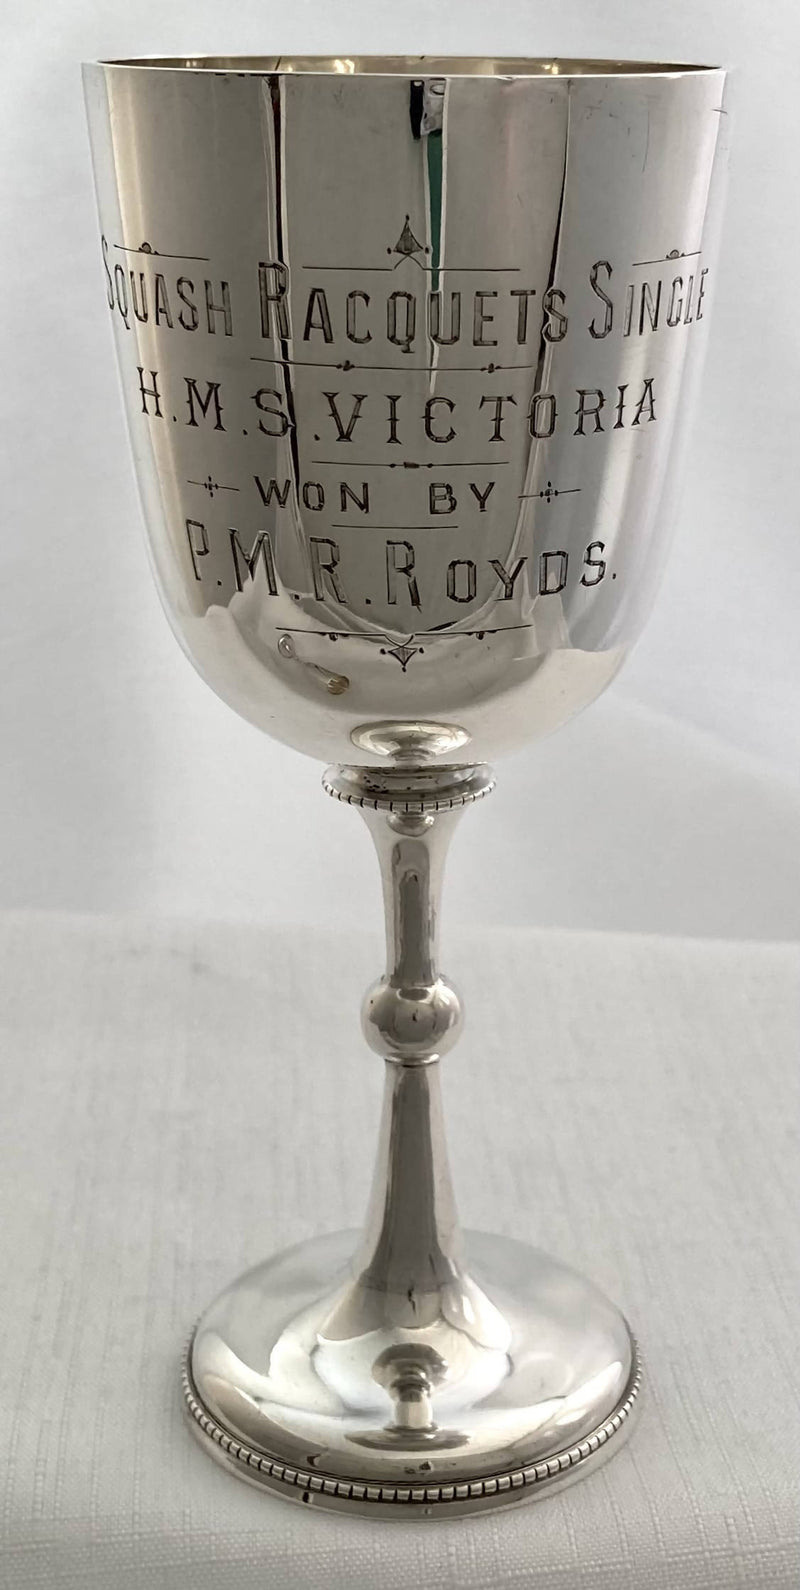 Pair of Silver Trophy Goblets for future Royal Navy Admiral P. M. R. Royds on H.M.S. Victoria. London 1891/92 George Jackson. 6 troy ounces.